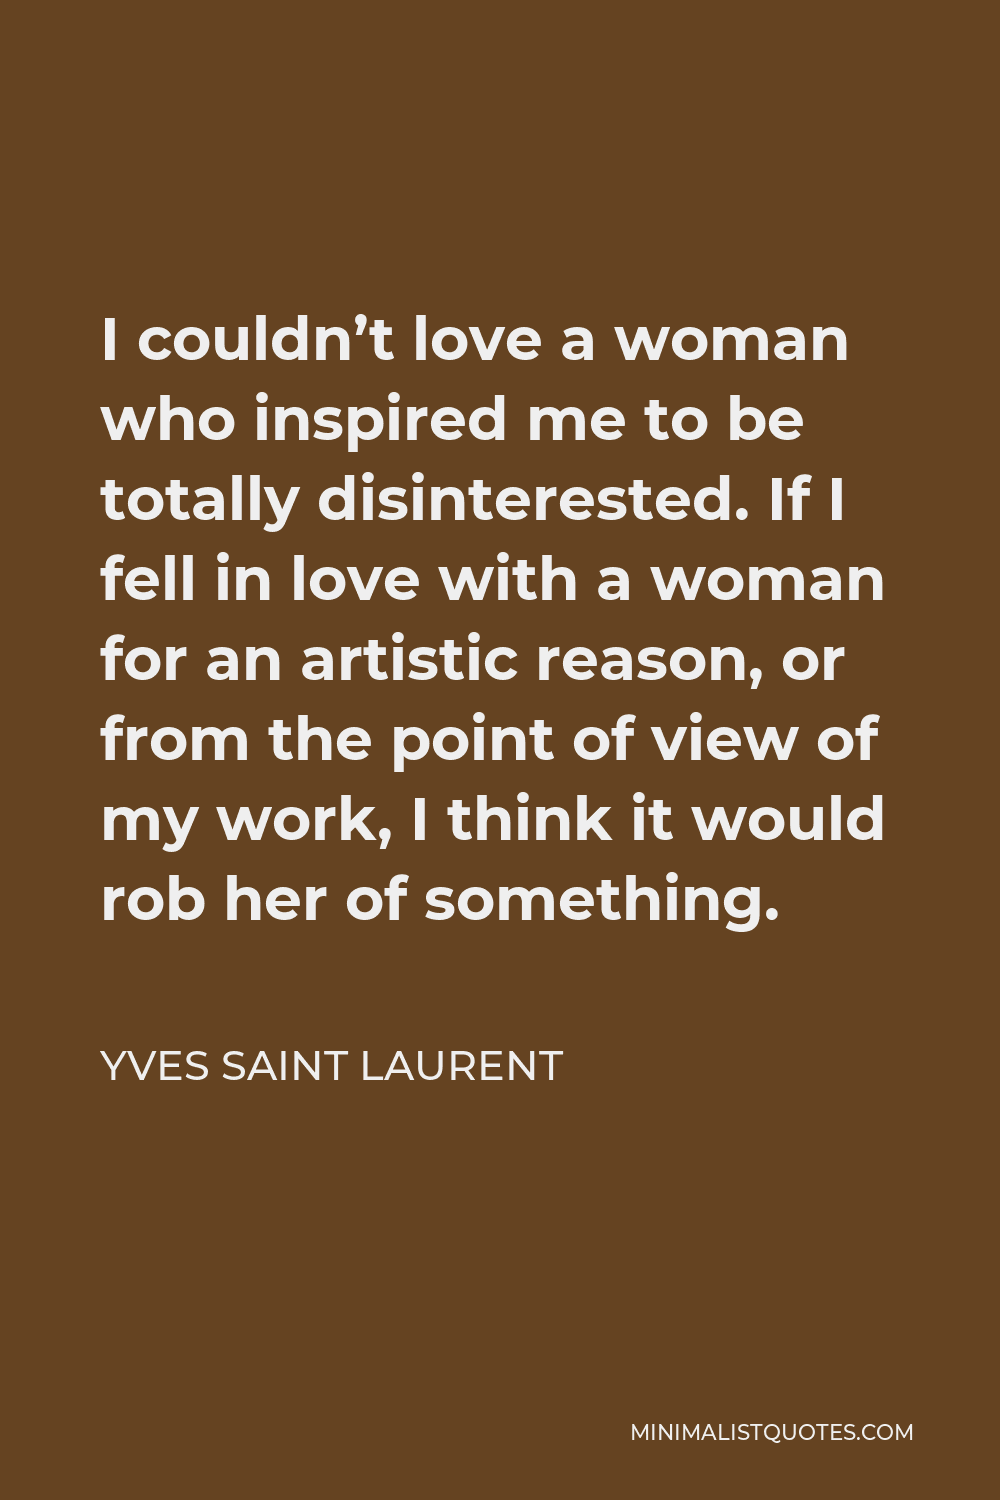 Yves Saint Laurent Quote - I couldn’t love a woman who inspired me to be totally disinterested. If I fell in love with a woman for an artistic reason, or from the point of view of my work, I think it would rob her of something.